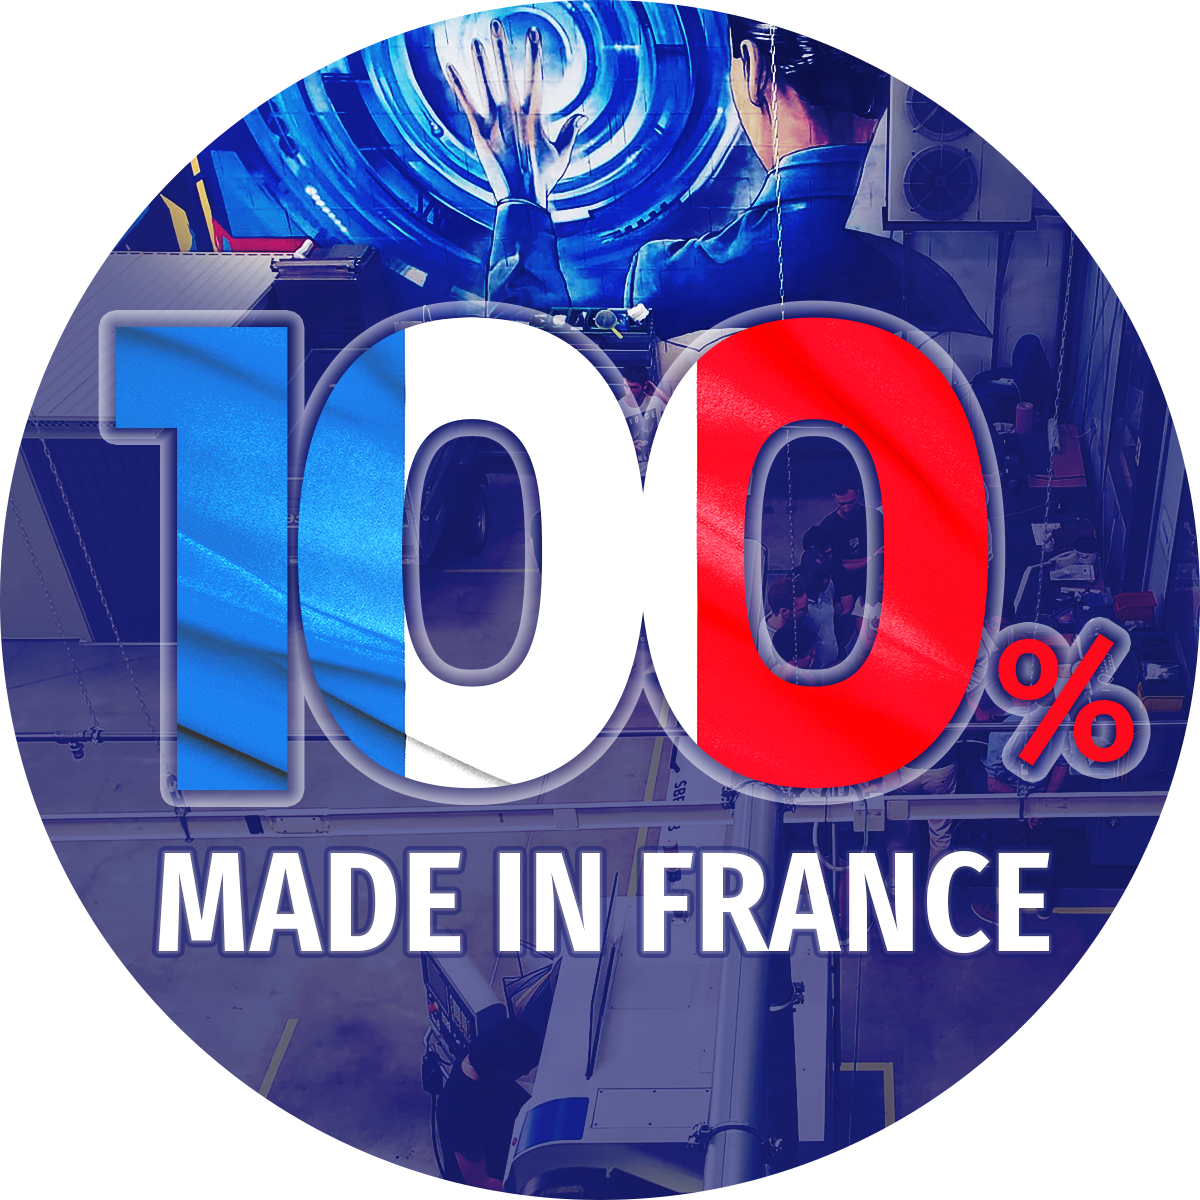 Implants made in France